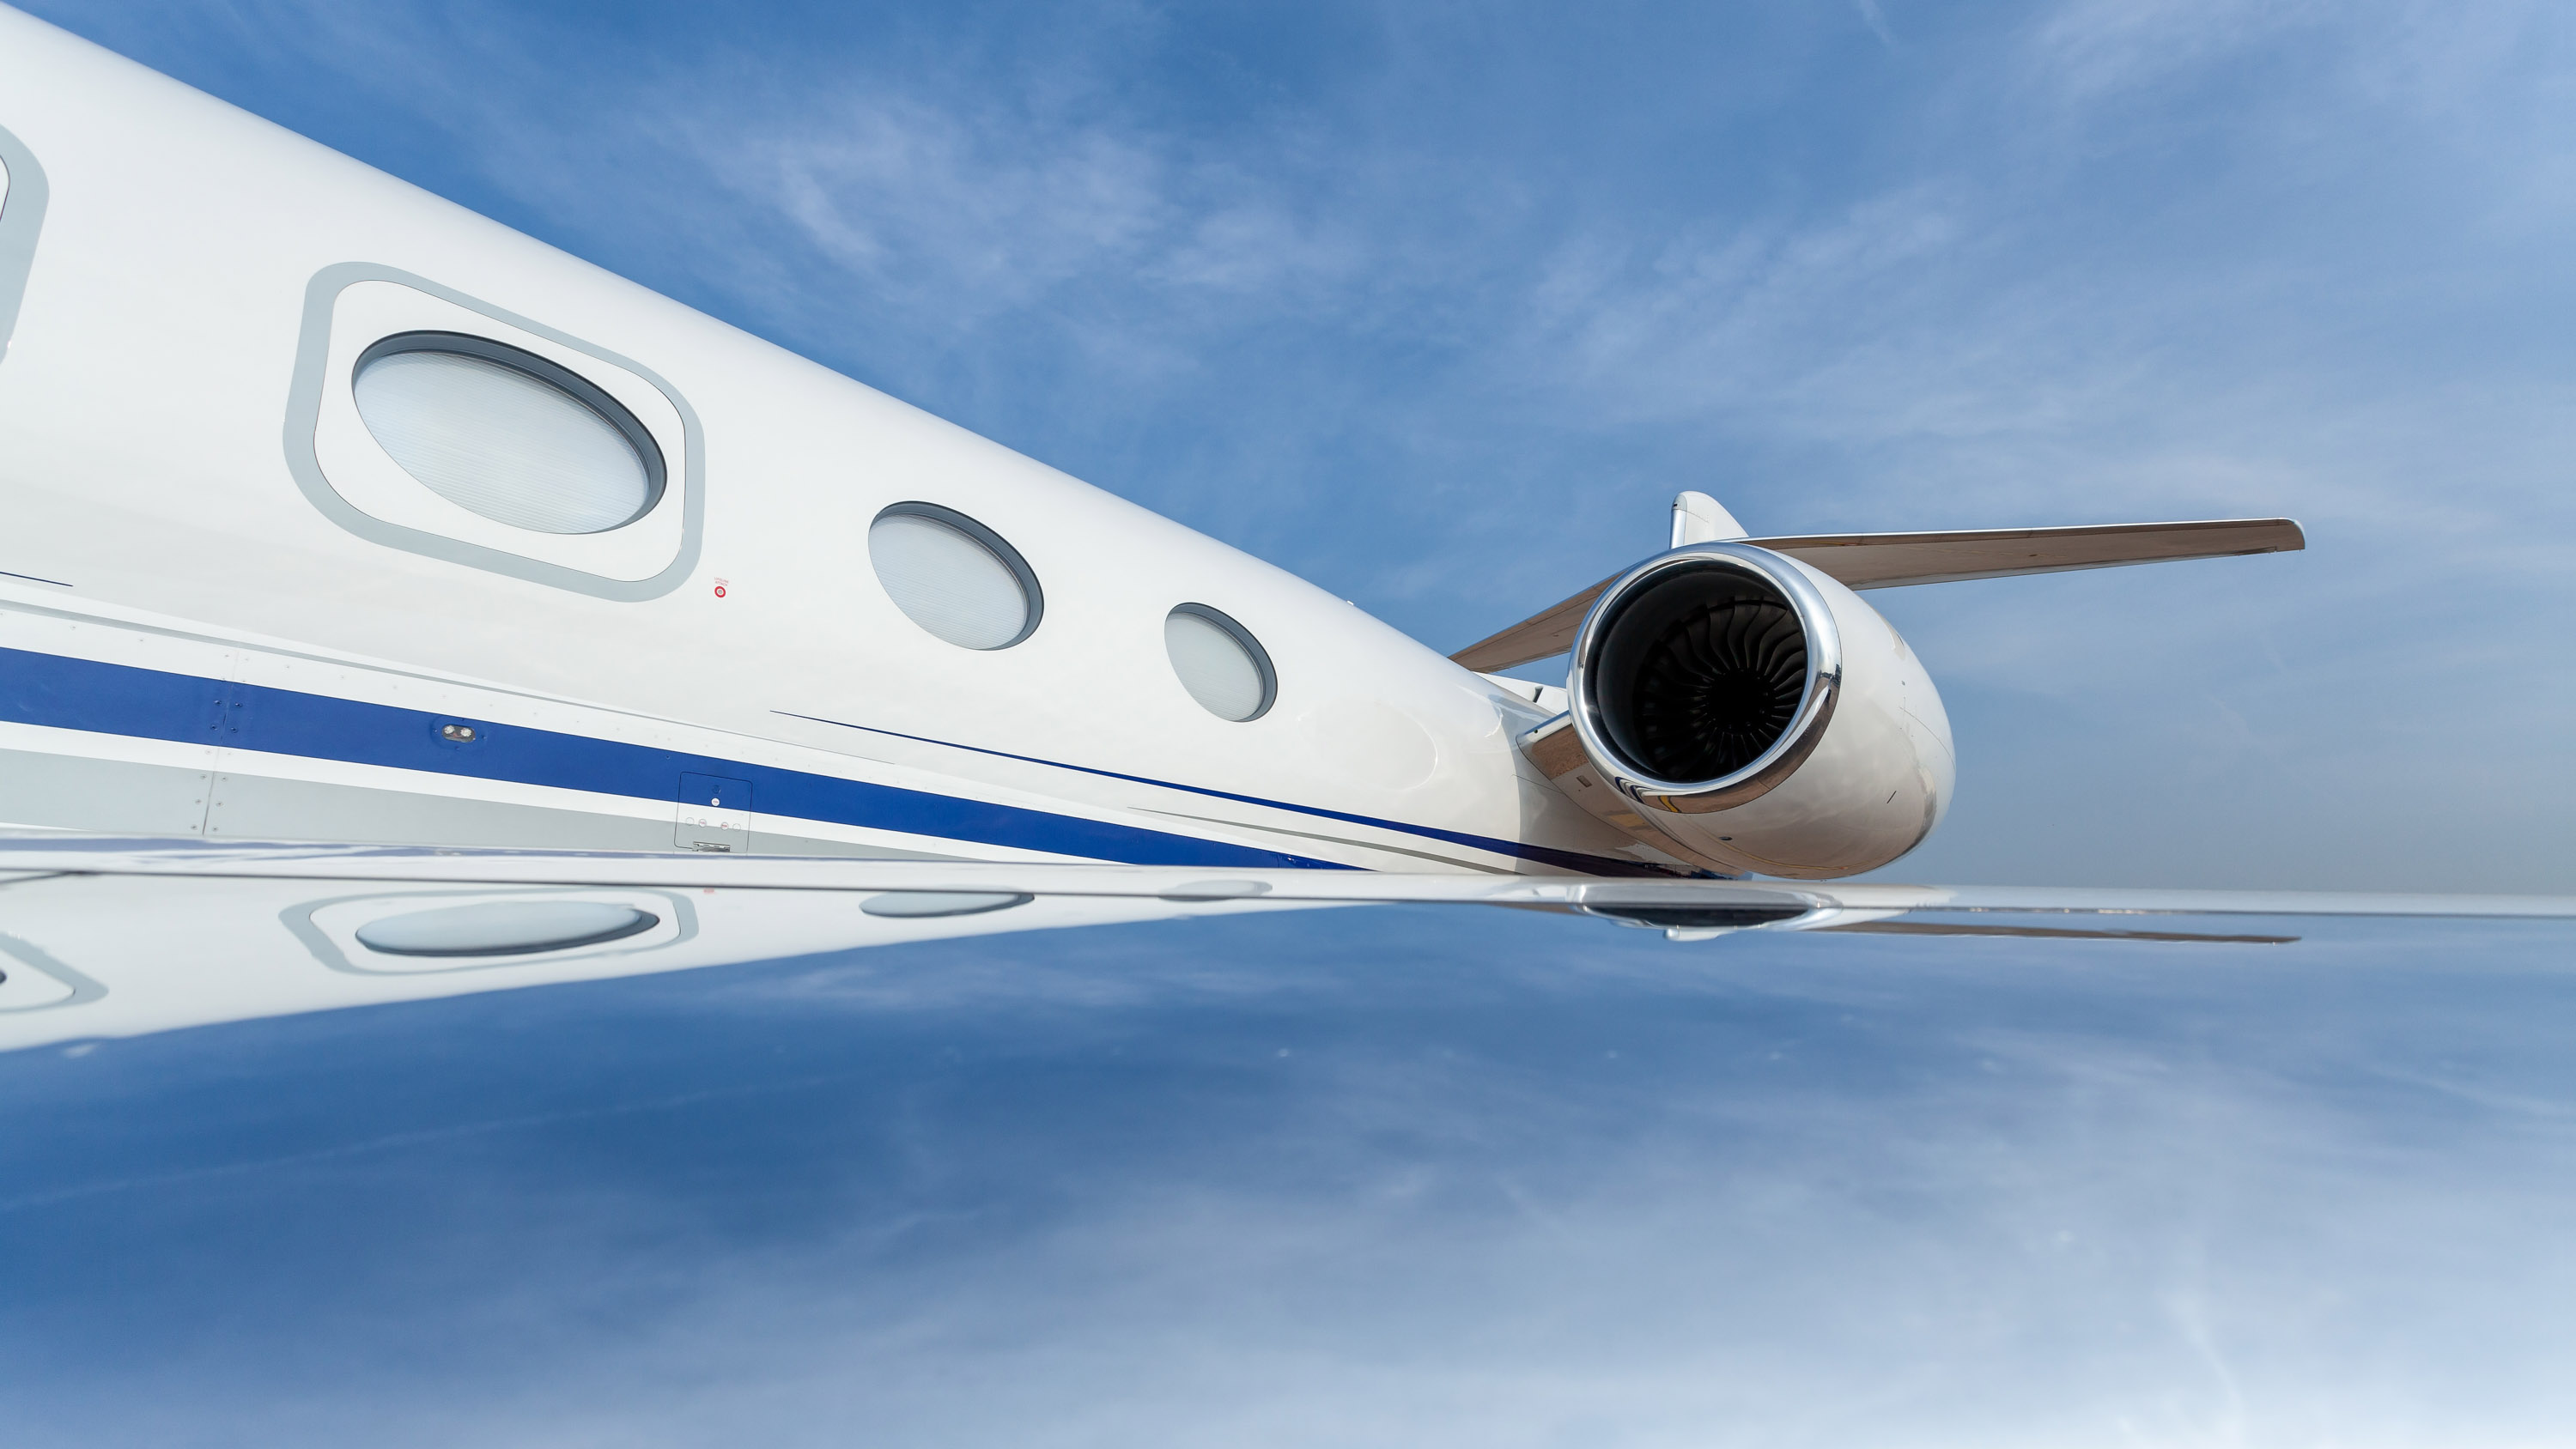 A Gulfstream G650 private jet. Wide angle view of the fuselage, wing and engine with blue sky reflections.